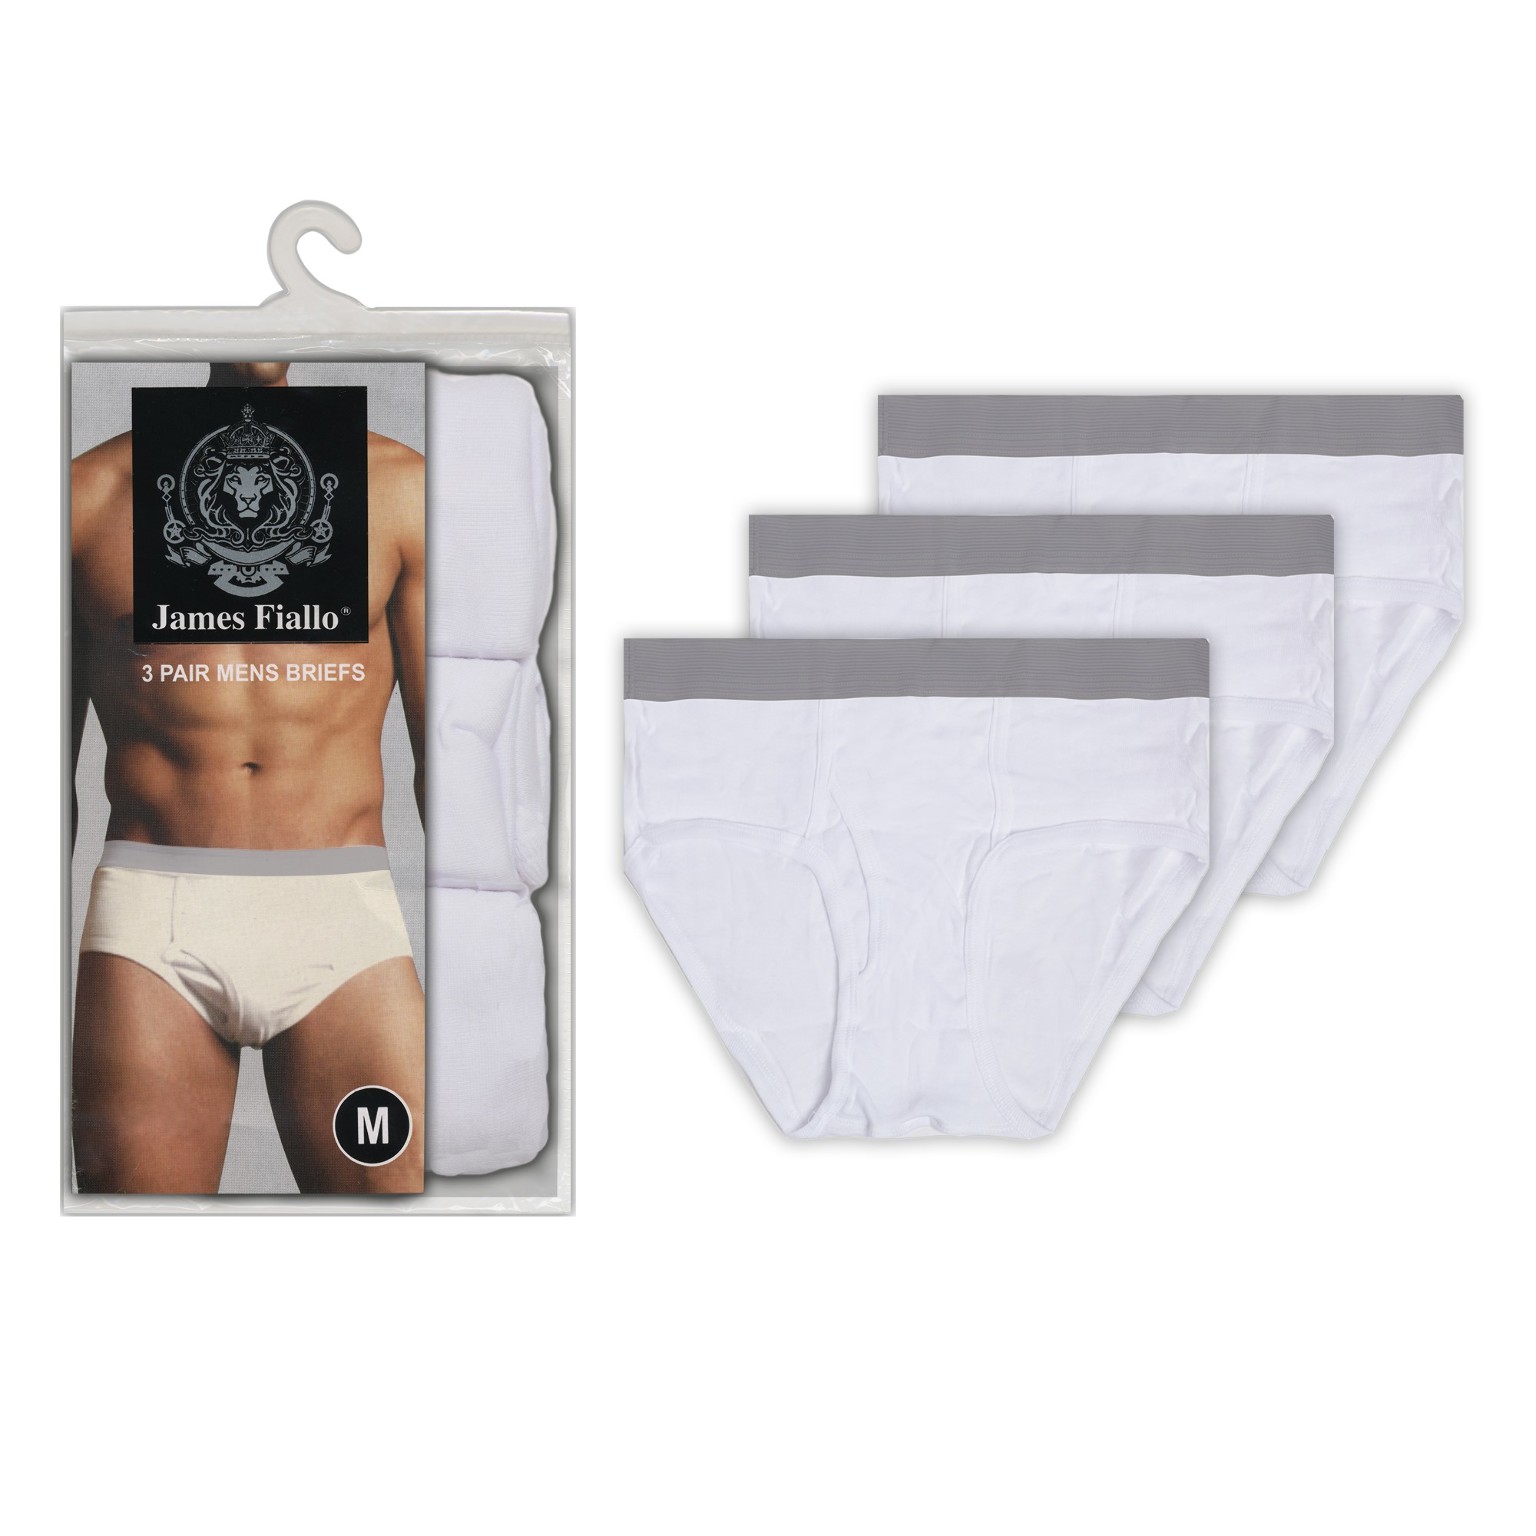 Wholesale Boxers and Underwear catalog for Men